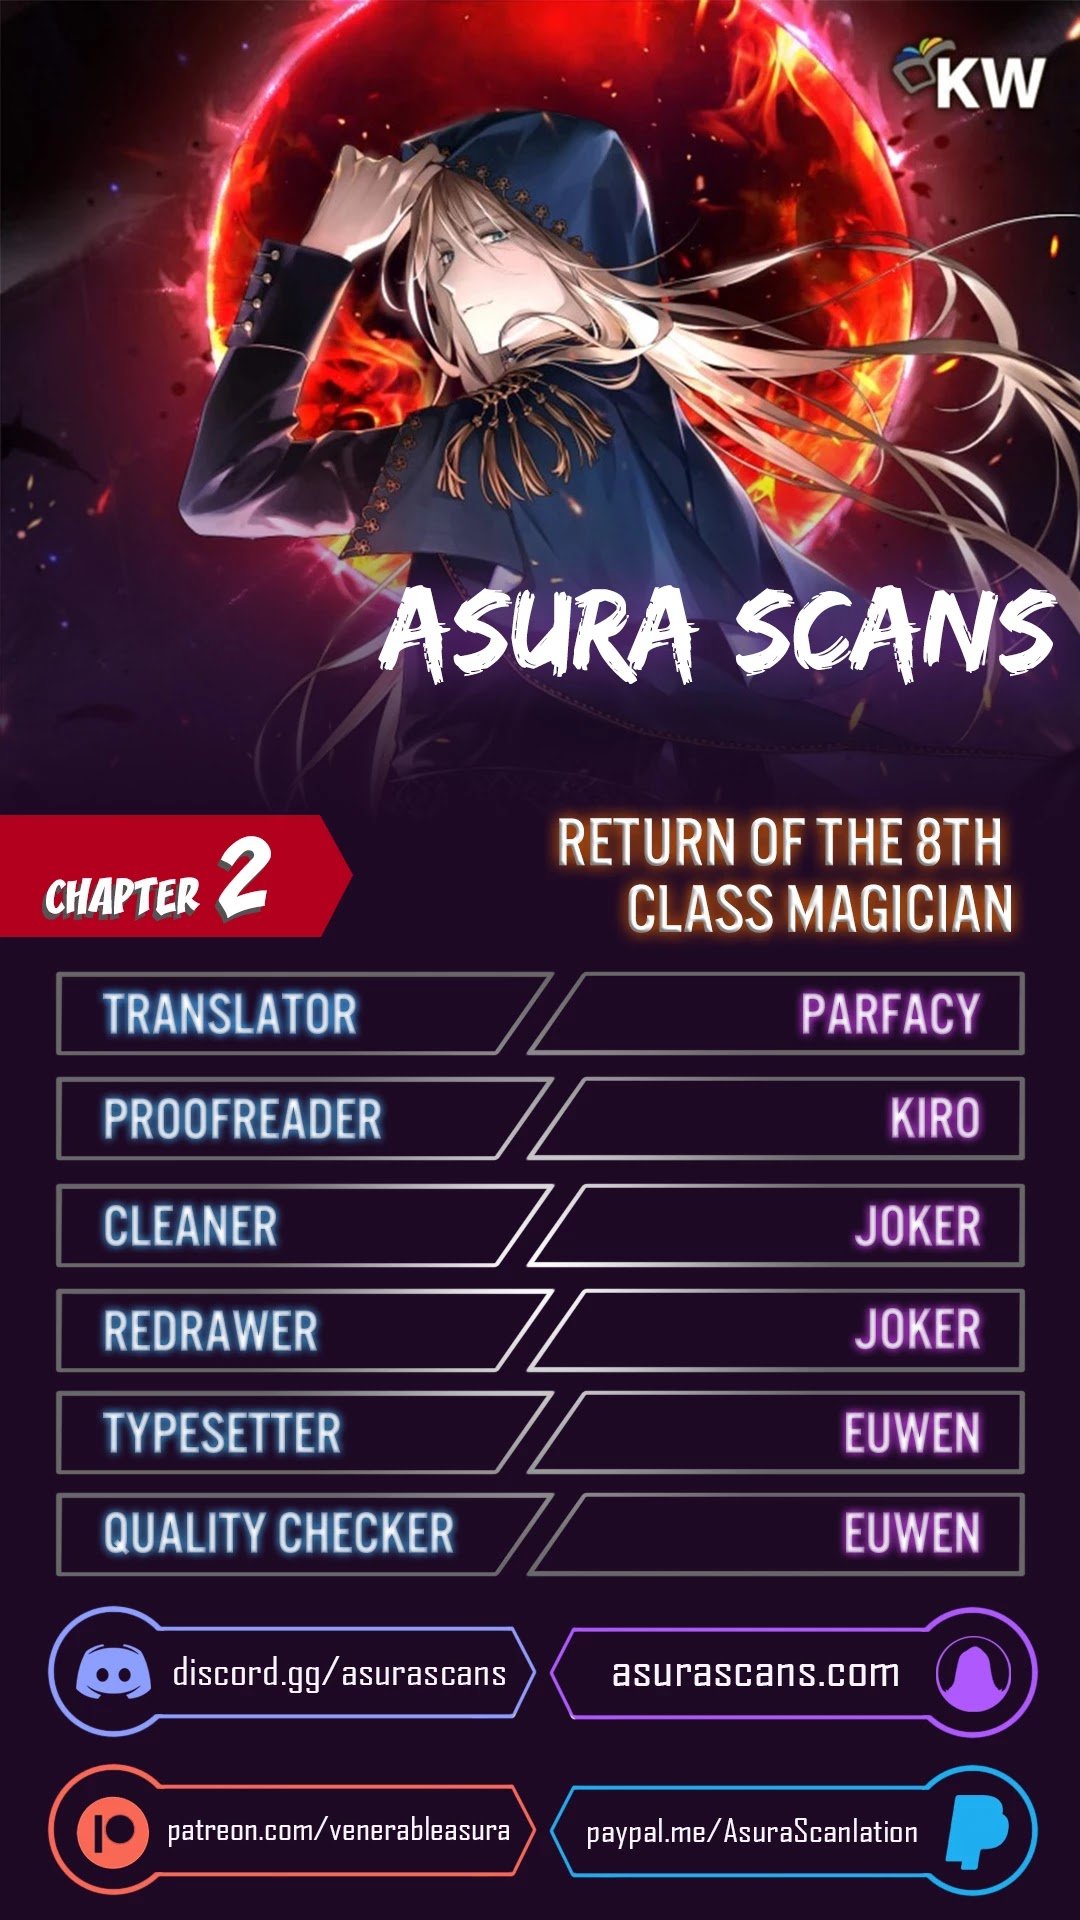 Return of the 8th class Magician chapter 2